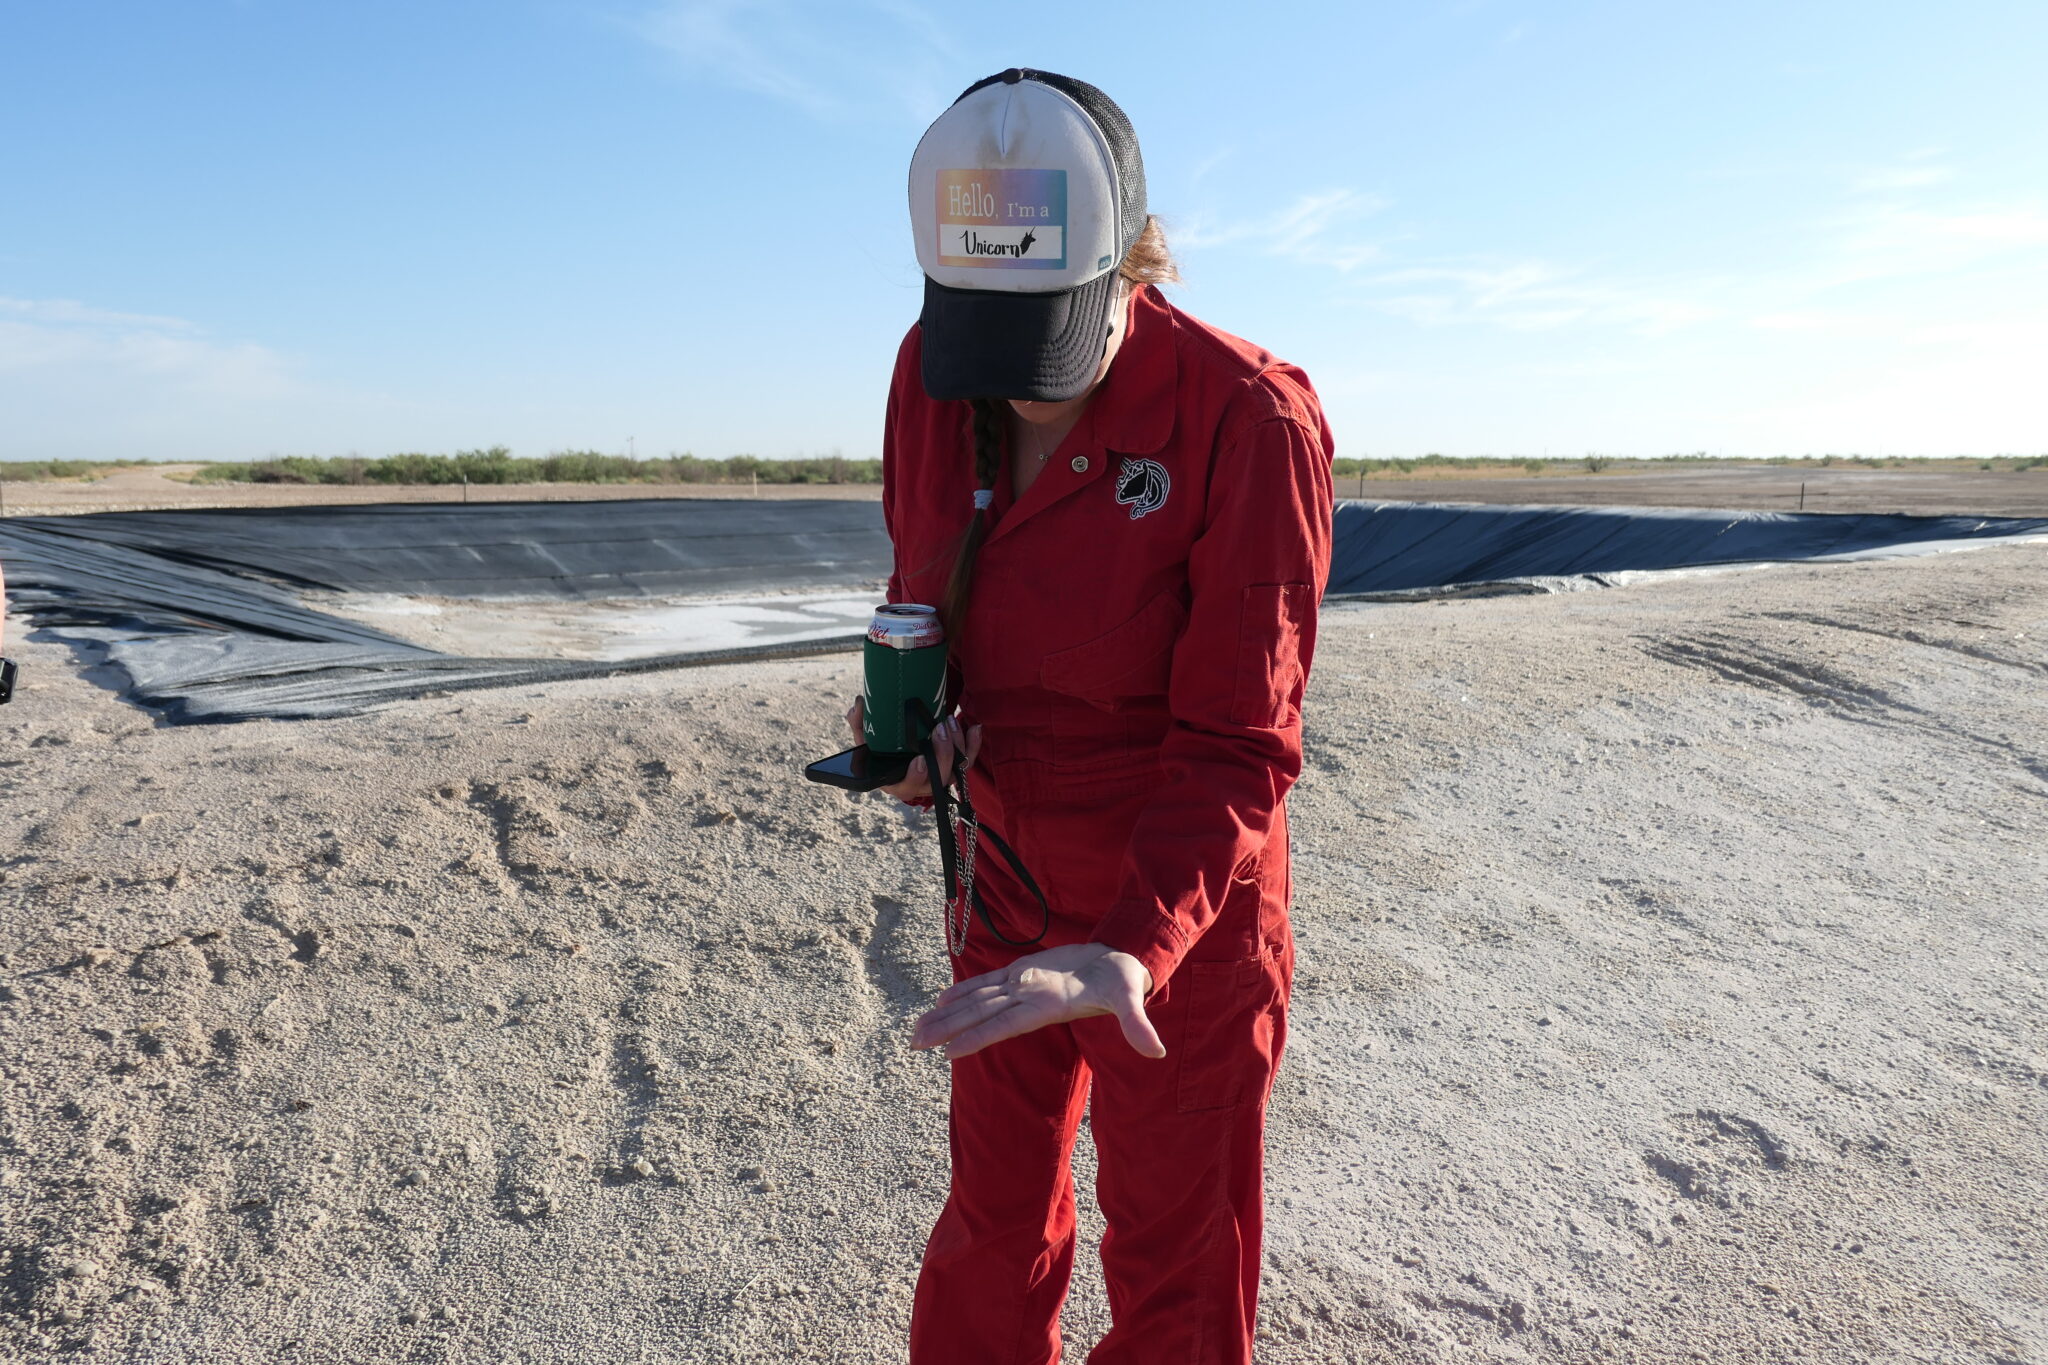 A woman in a red jumpsuit and baseball cap stands in sand looking at something in her hand.